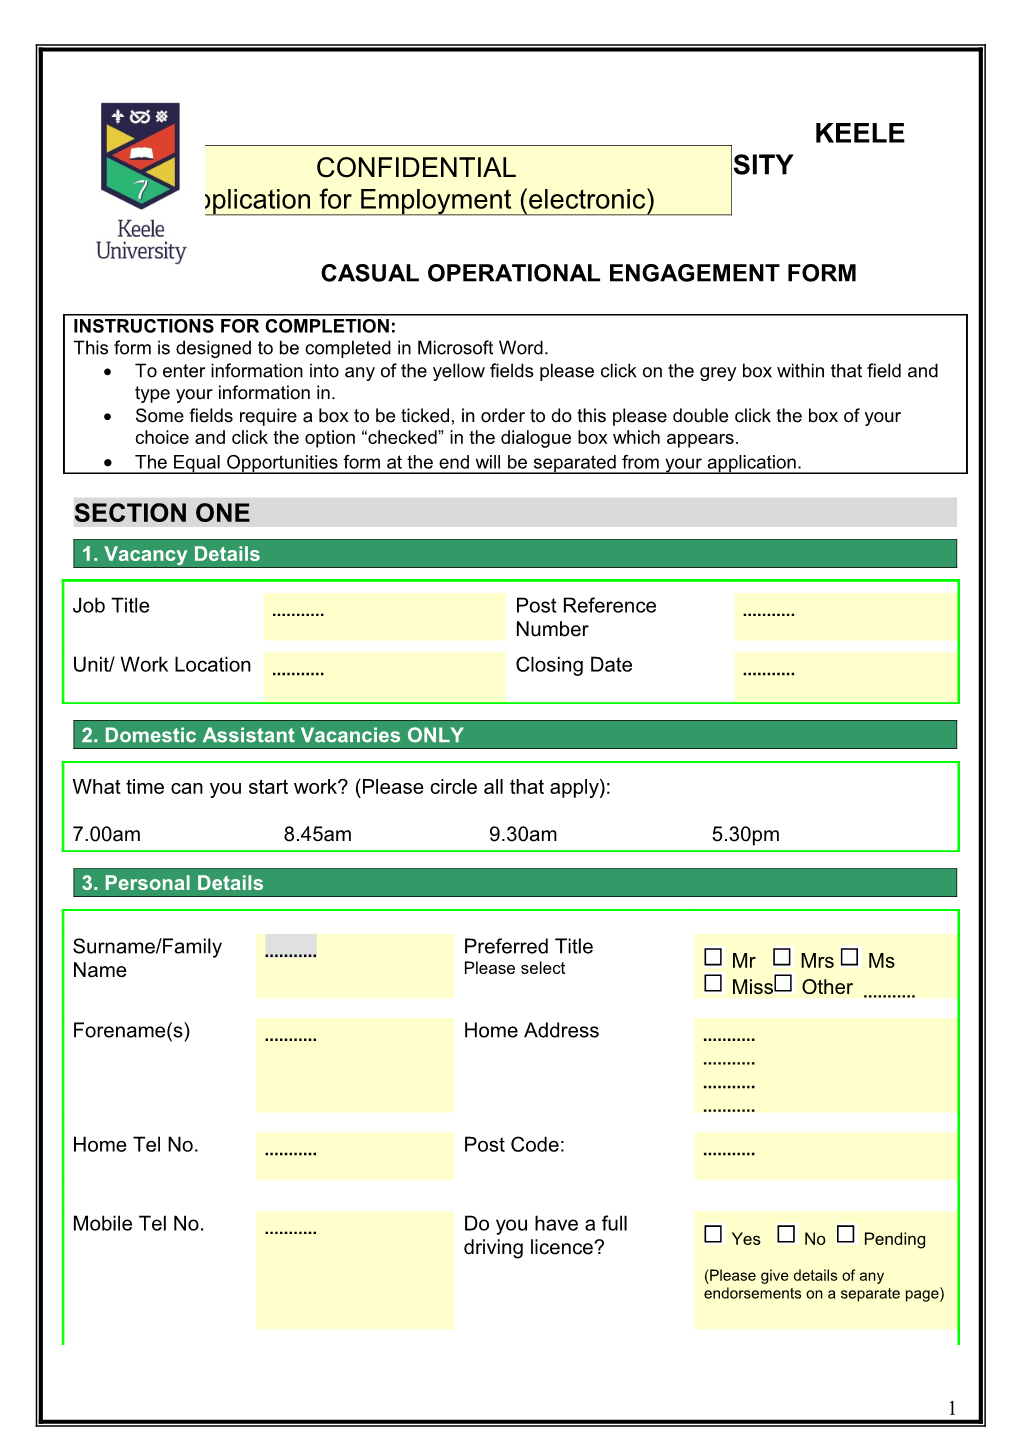 Casual Operational Engagement Form